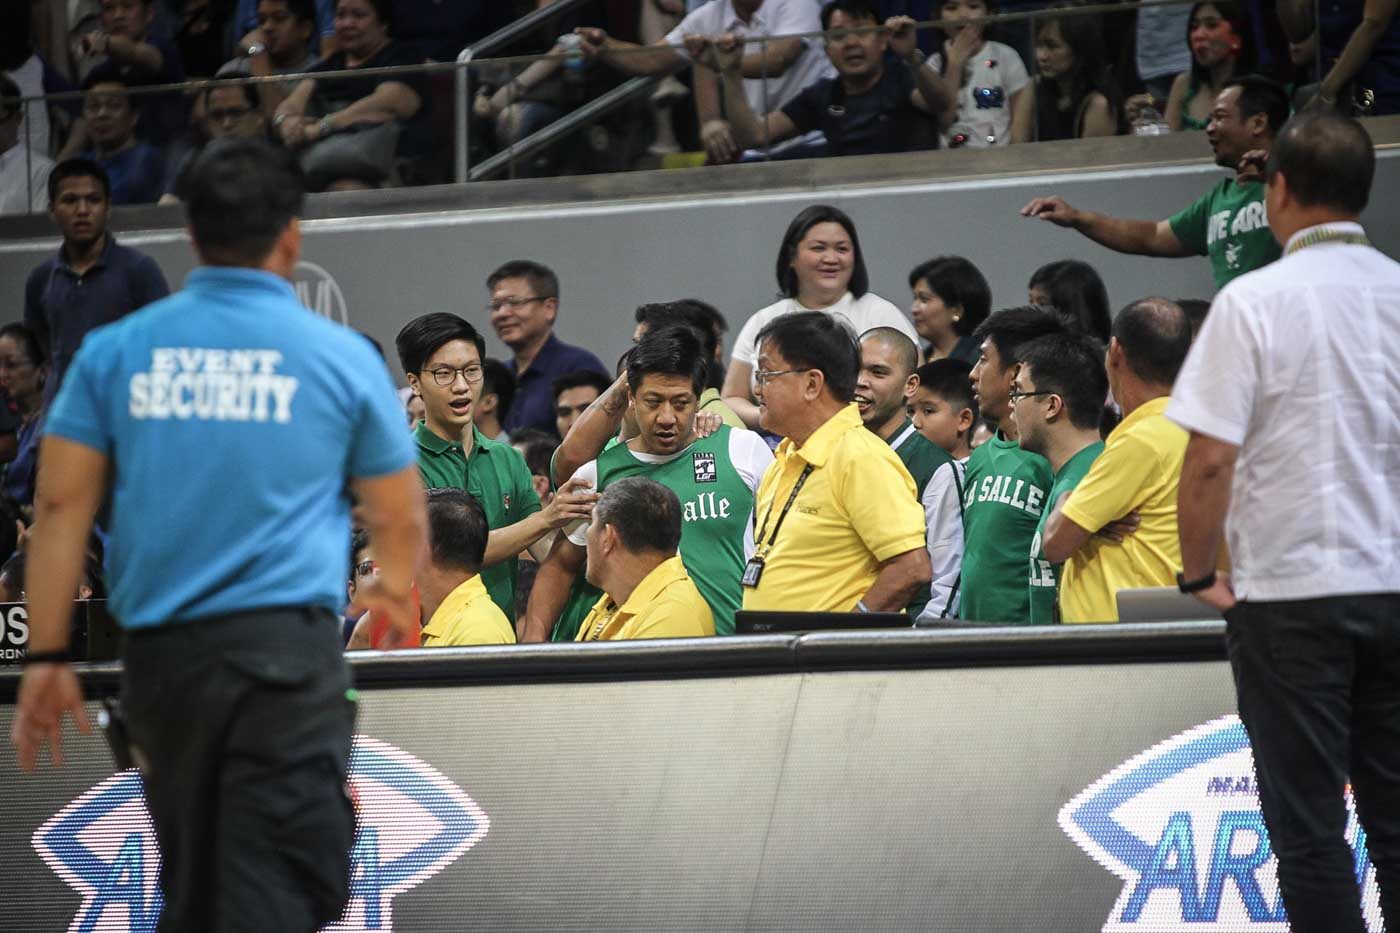 Stir in Ateneo-La Salle game as ex-Batangas vice gov charges bench